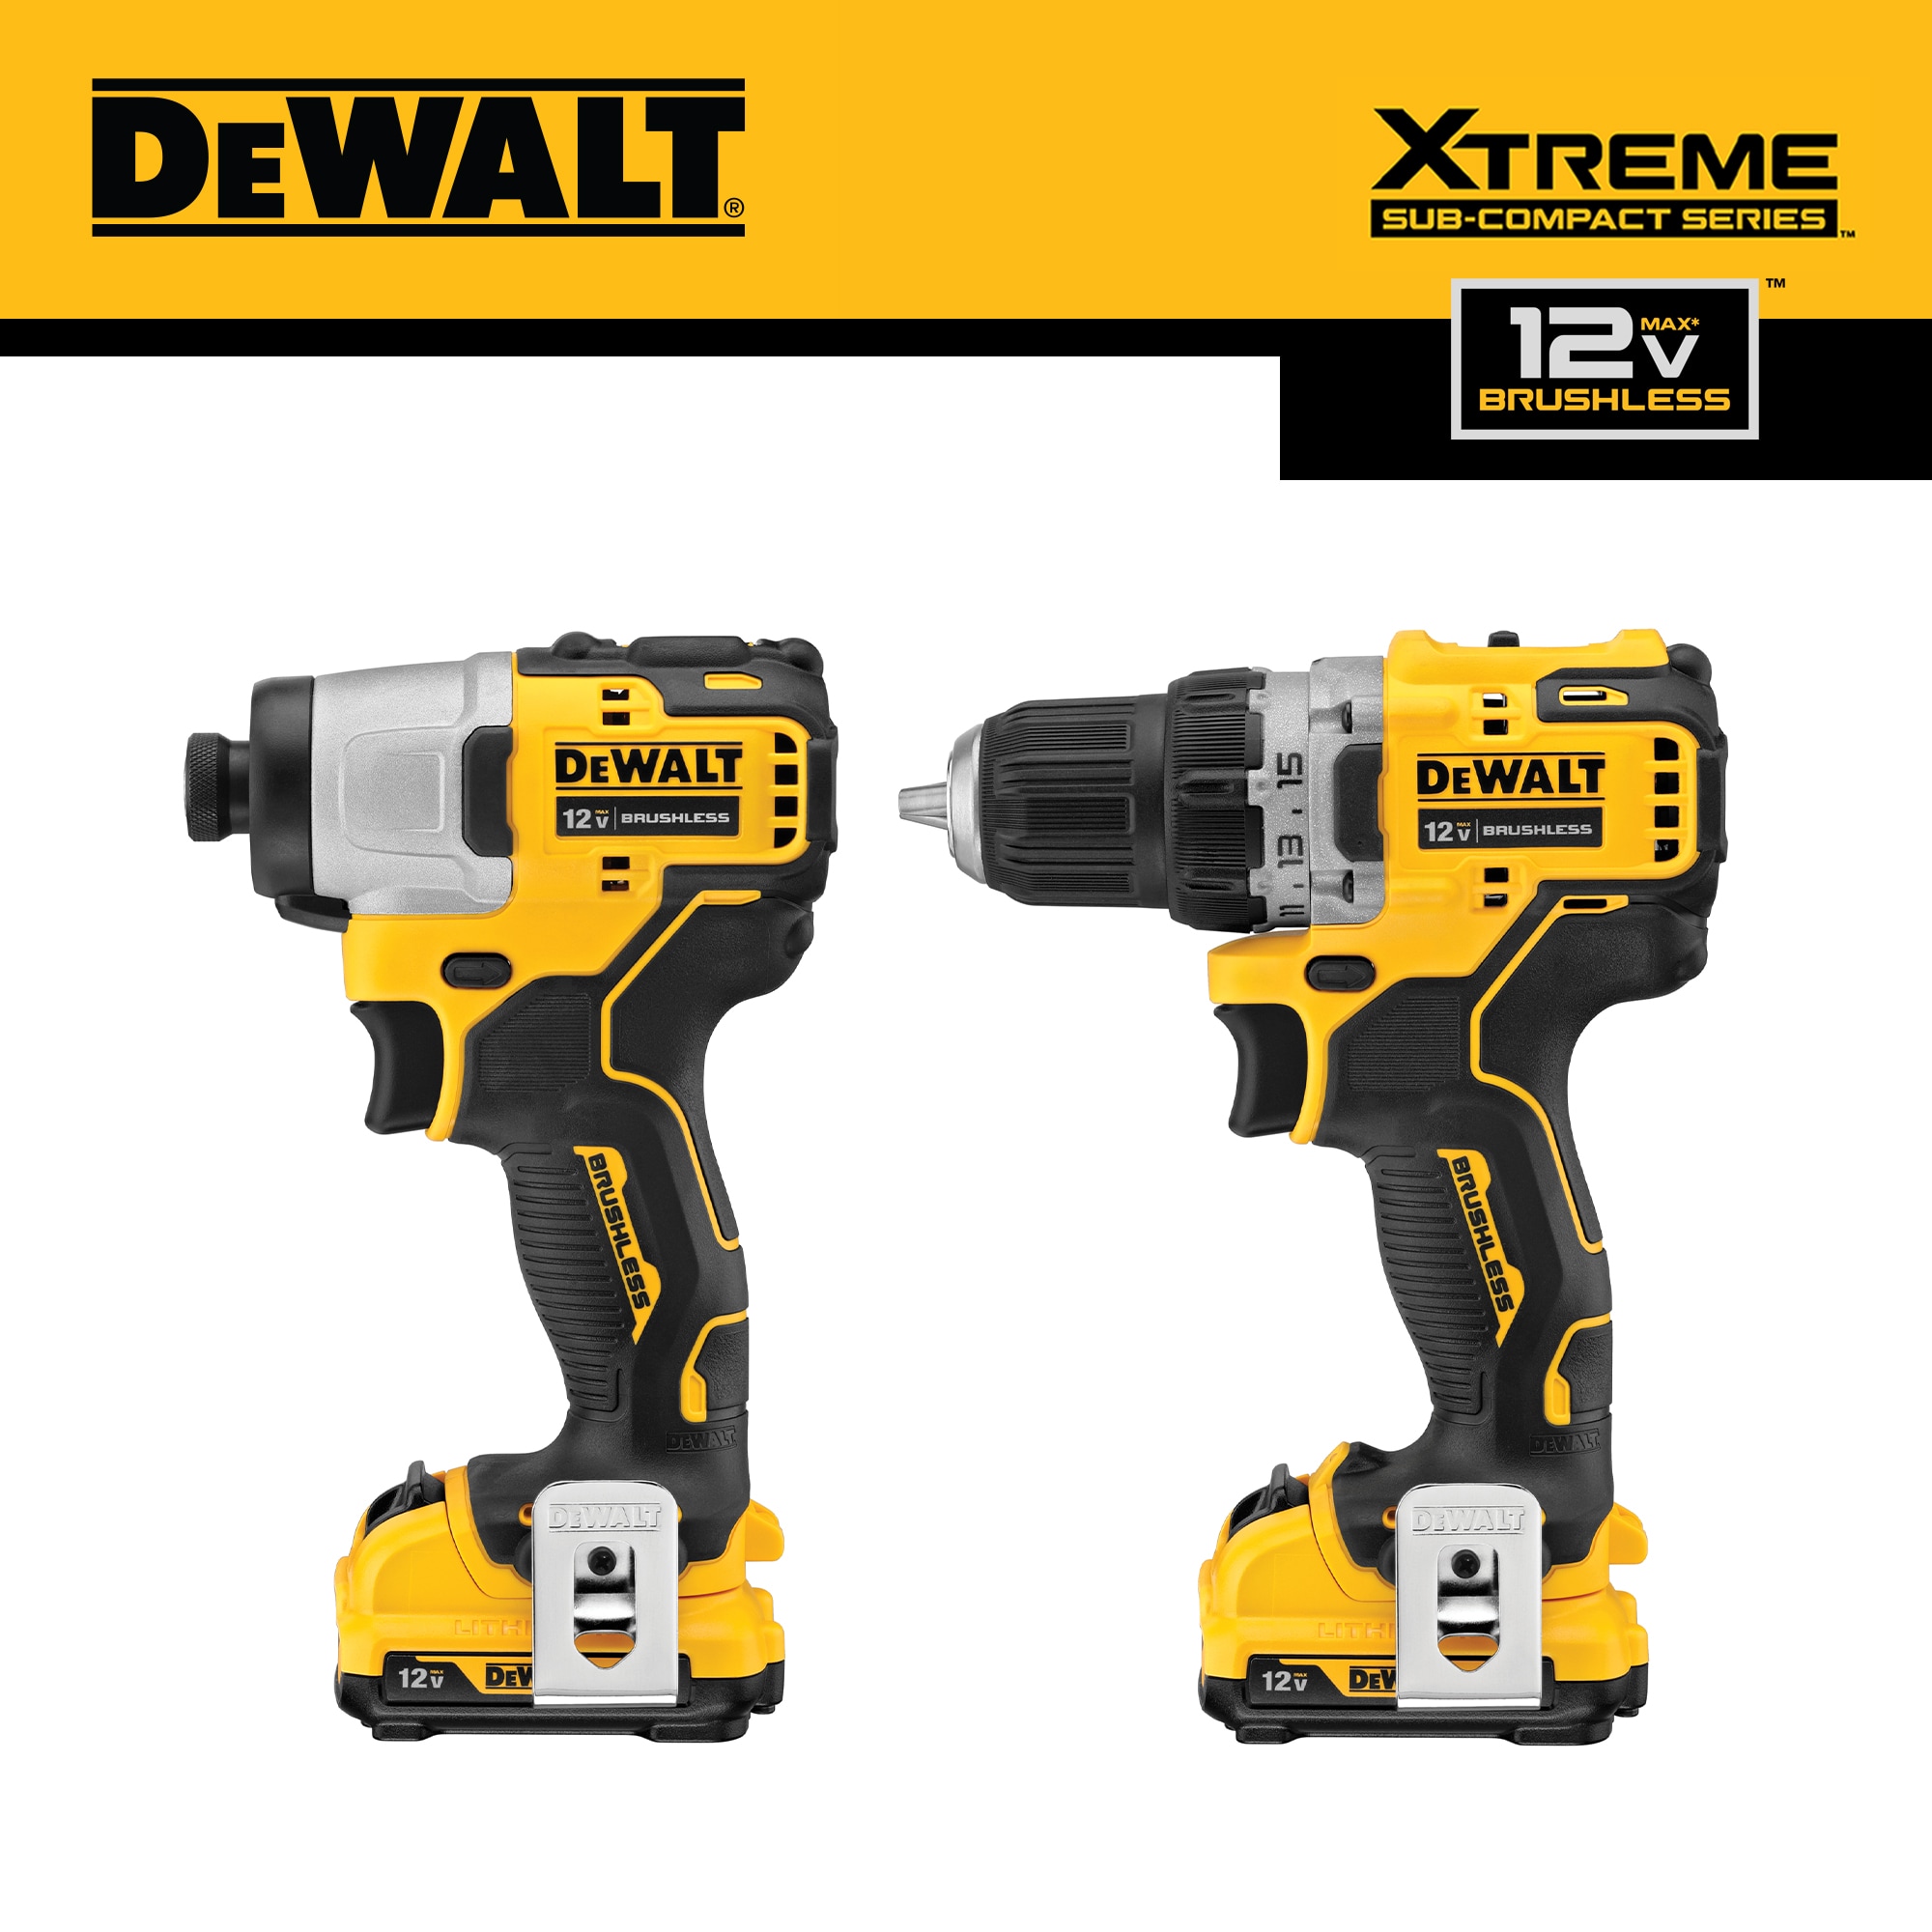 DEWALT XTREME 2-Tool 12-Volt Max Brushless Power Tool Combo Kit with Soft Case (2-Batteries and charger Included) on Sale At Lowe's